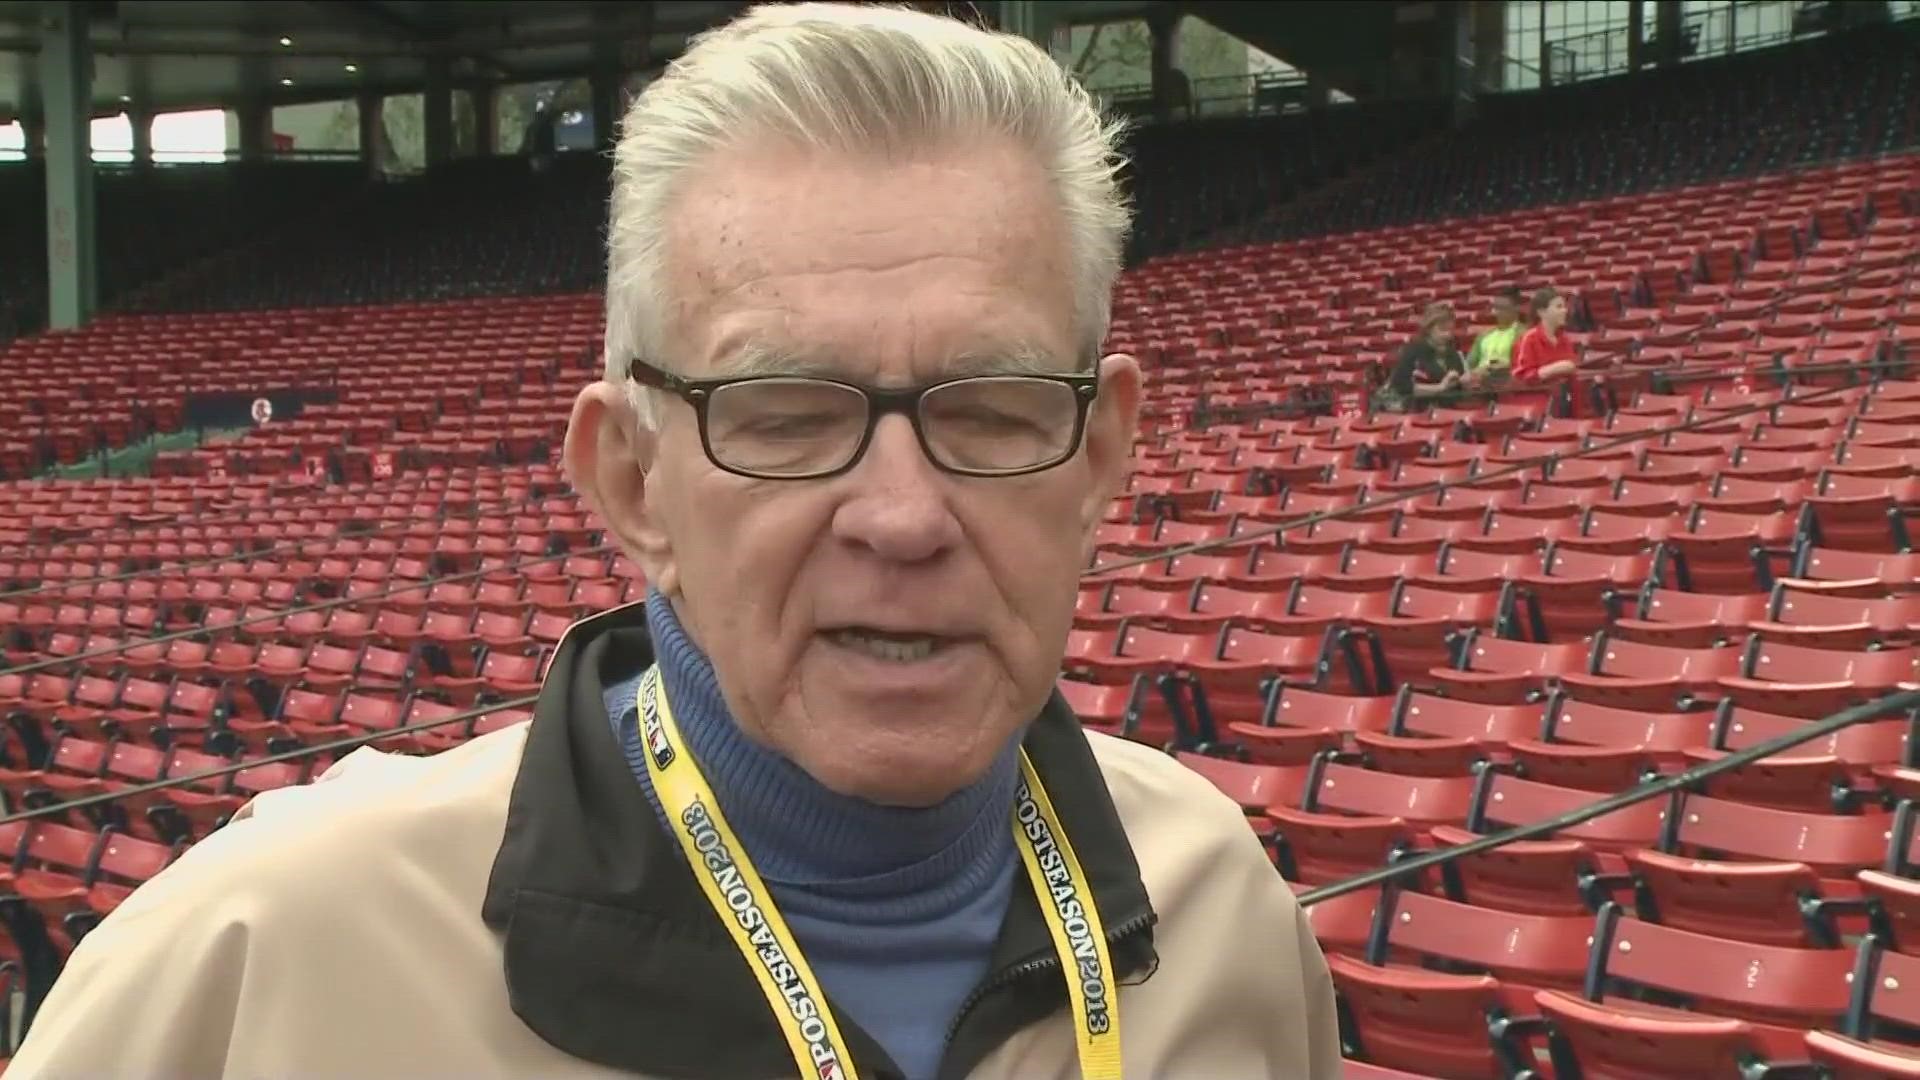 McCarver's death was announced by baseball's Hall of Fame, which said he died from heart failure Thursday morning in Memphis, Tennessee.